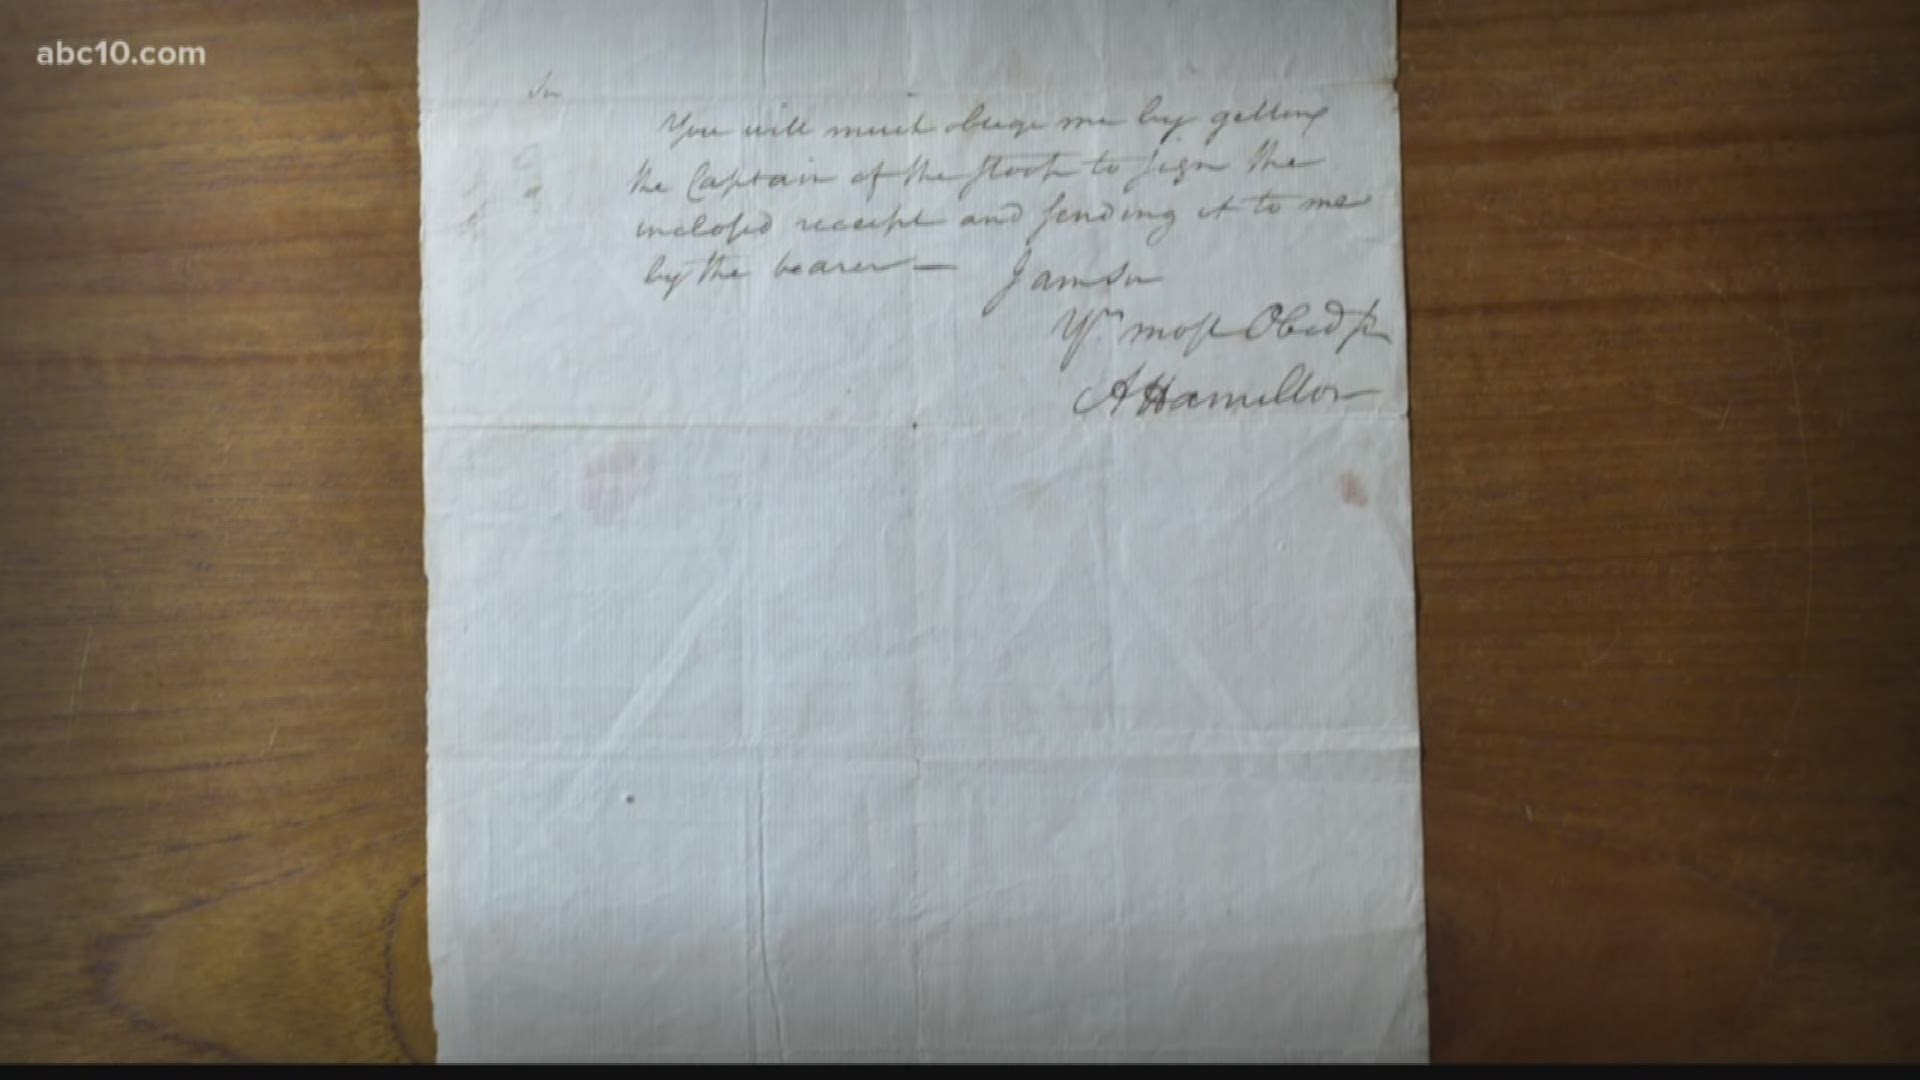 A letter penned by Alexander Hamilton will be auctioned off on Wednesday.